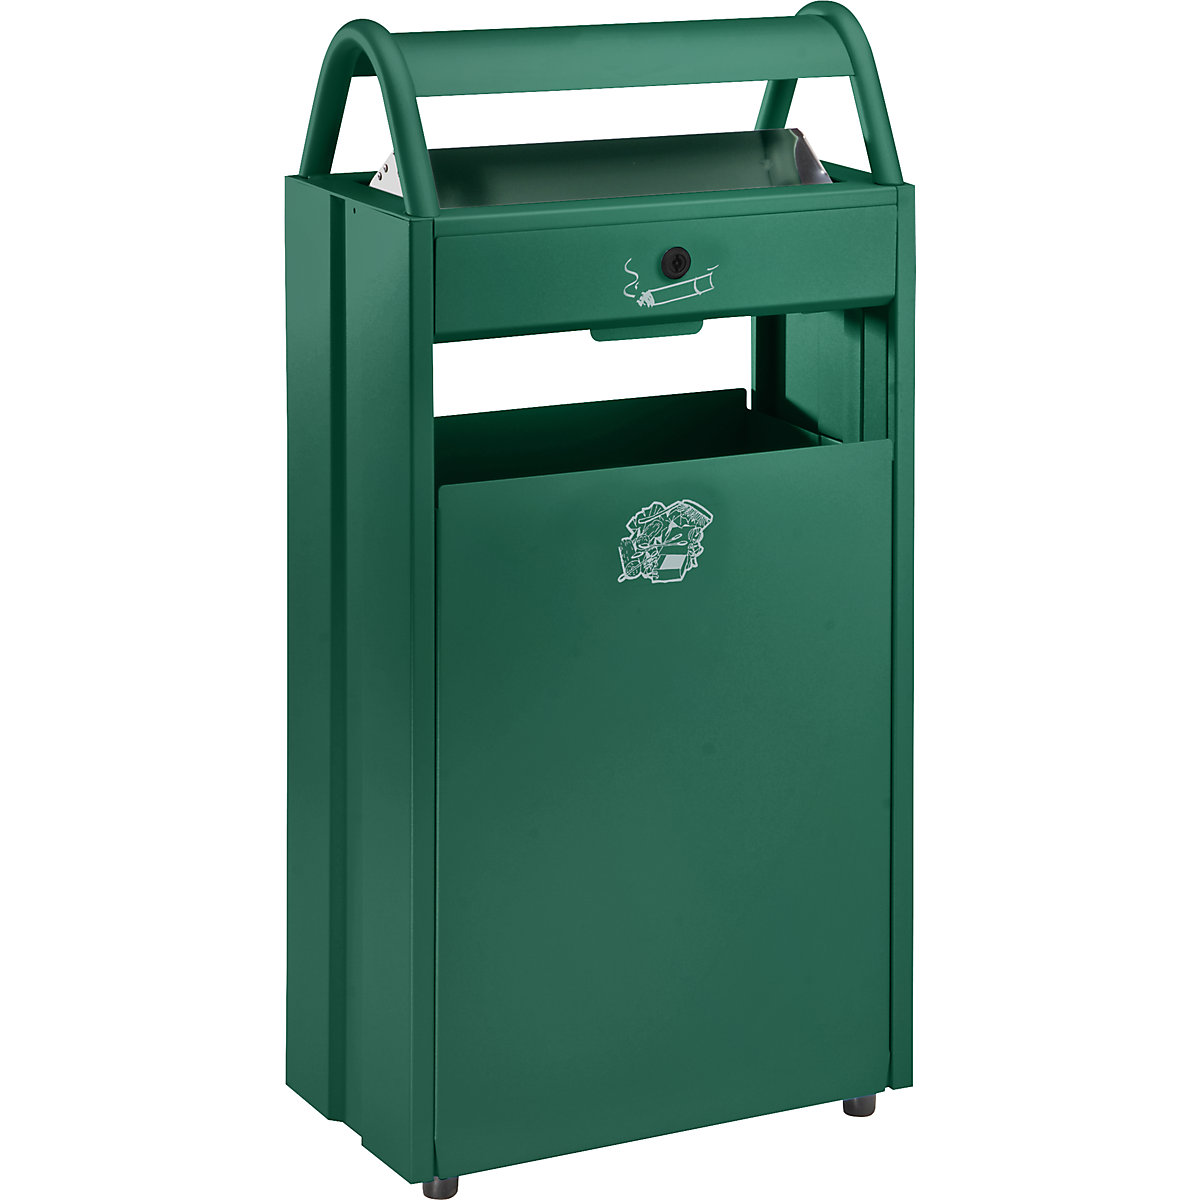 Waste collector with ashtray and rain protection hood – VAR